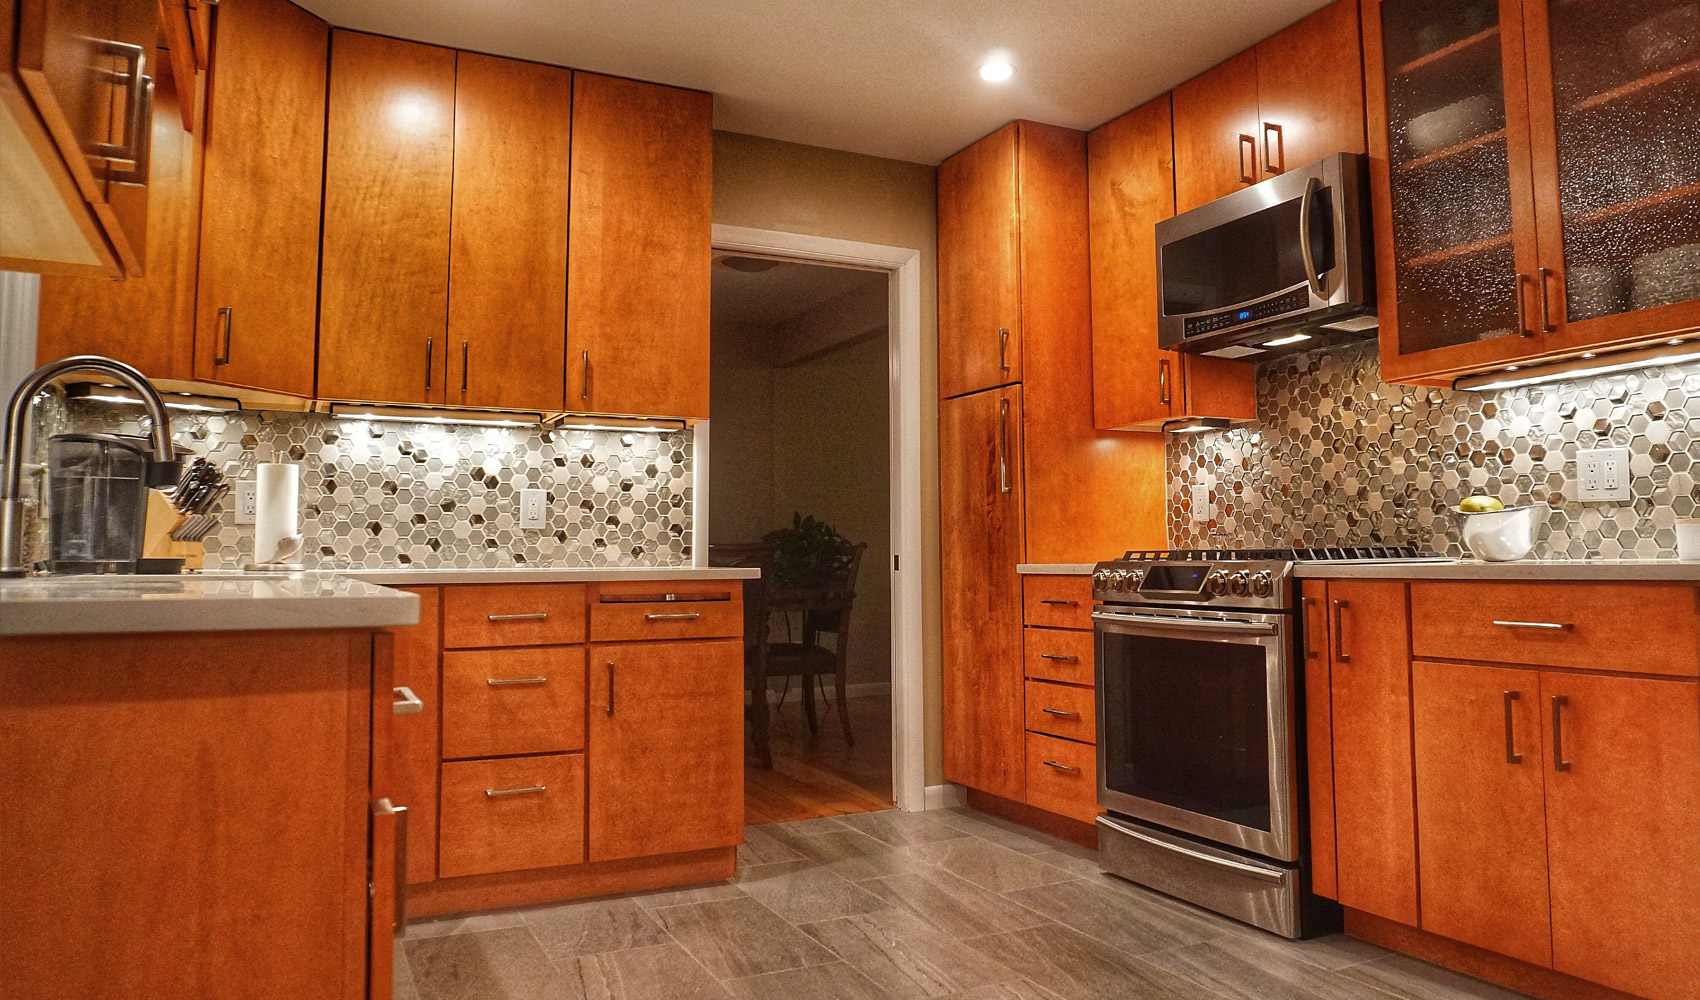 Kitchen Cabinets, Tile, & Countertops